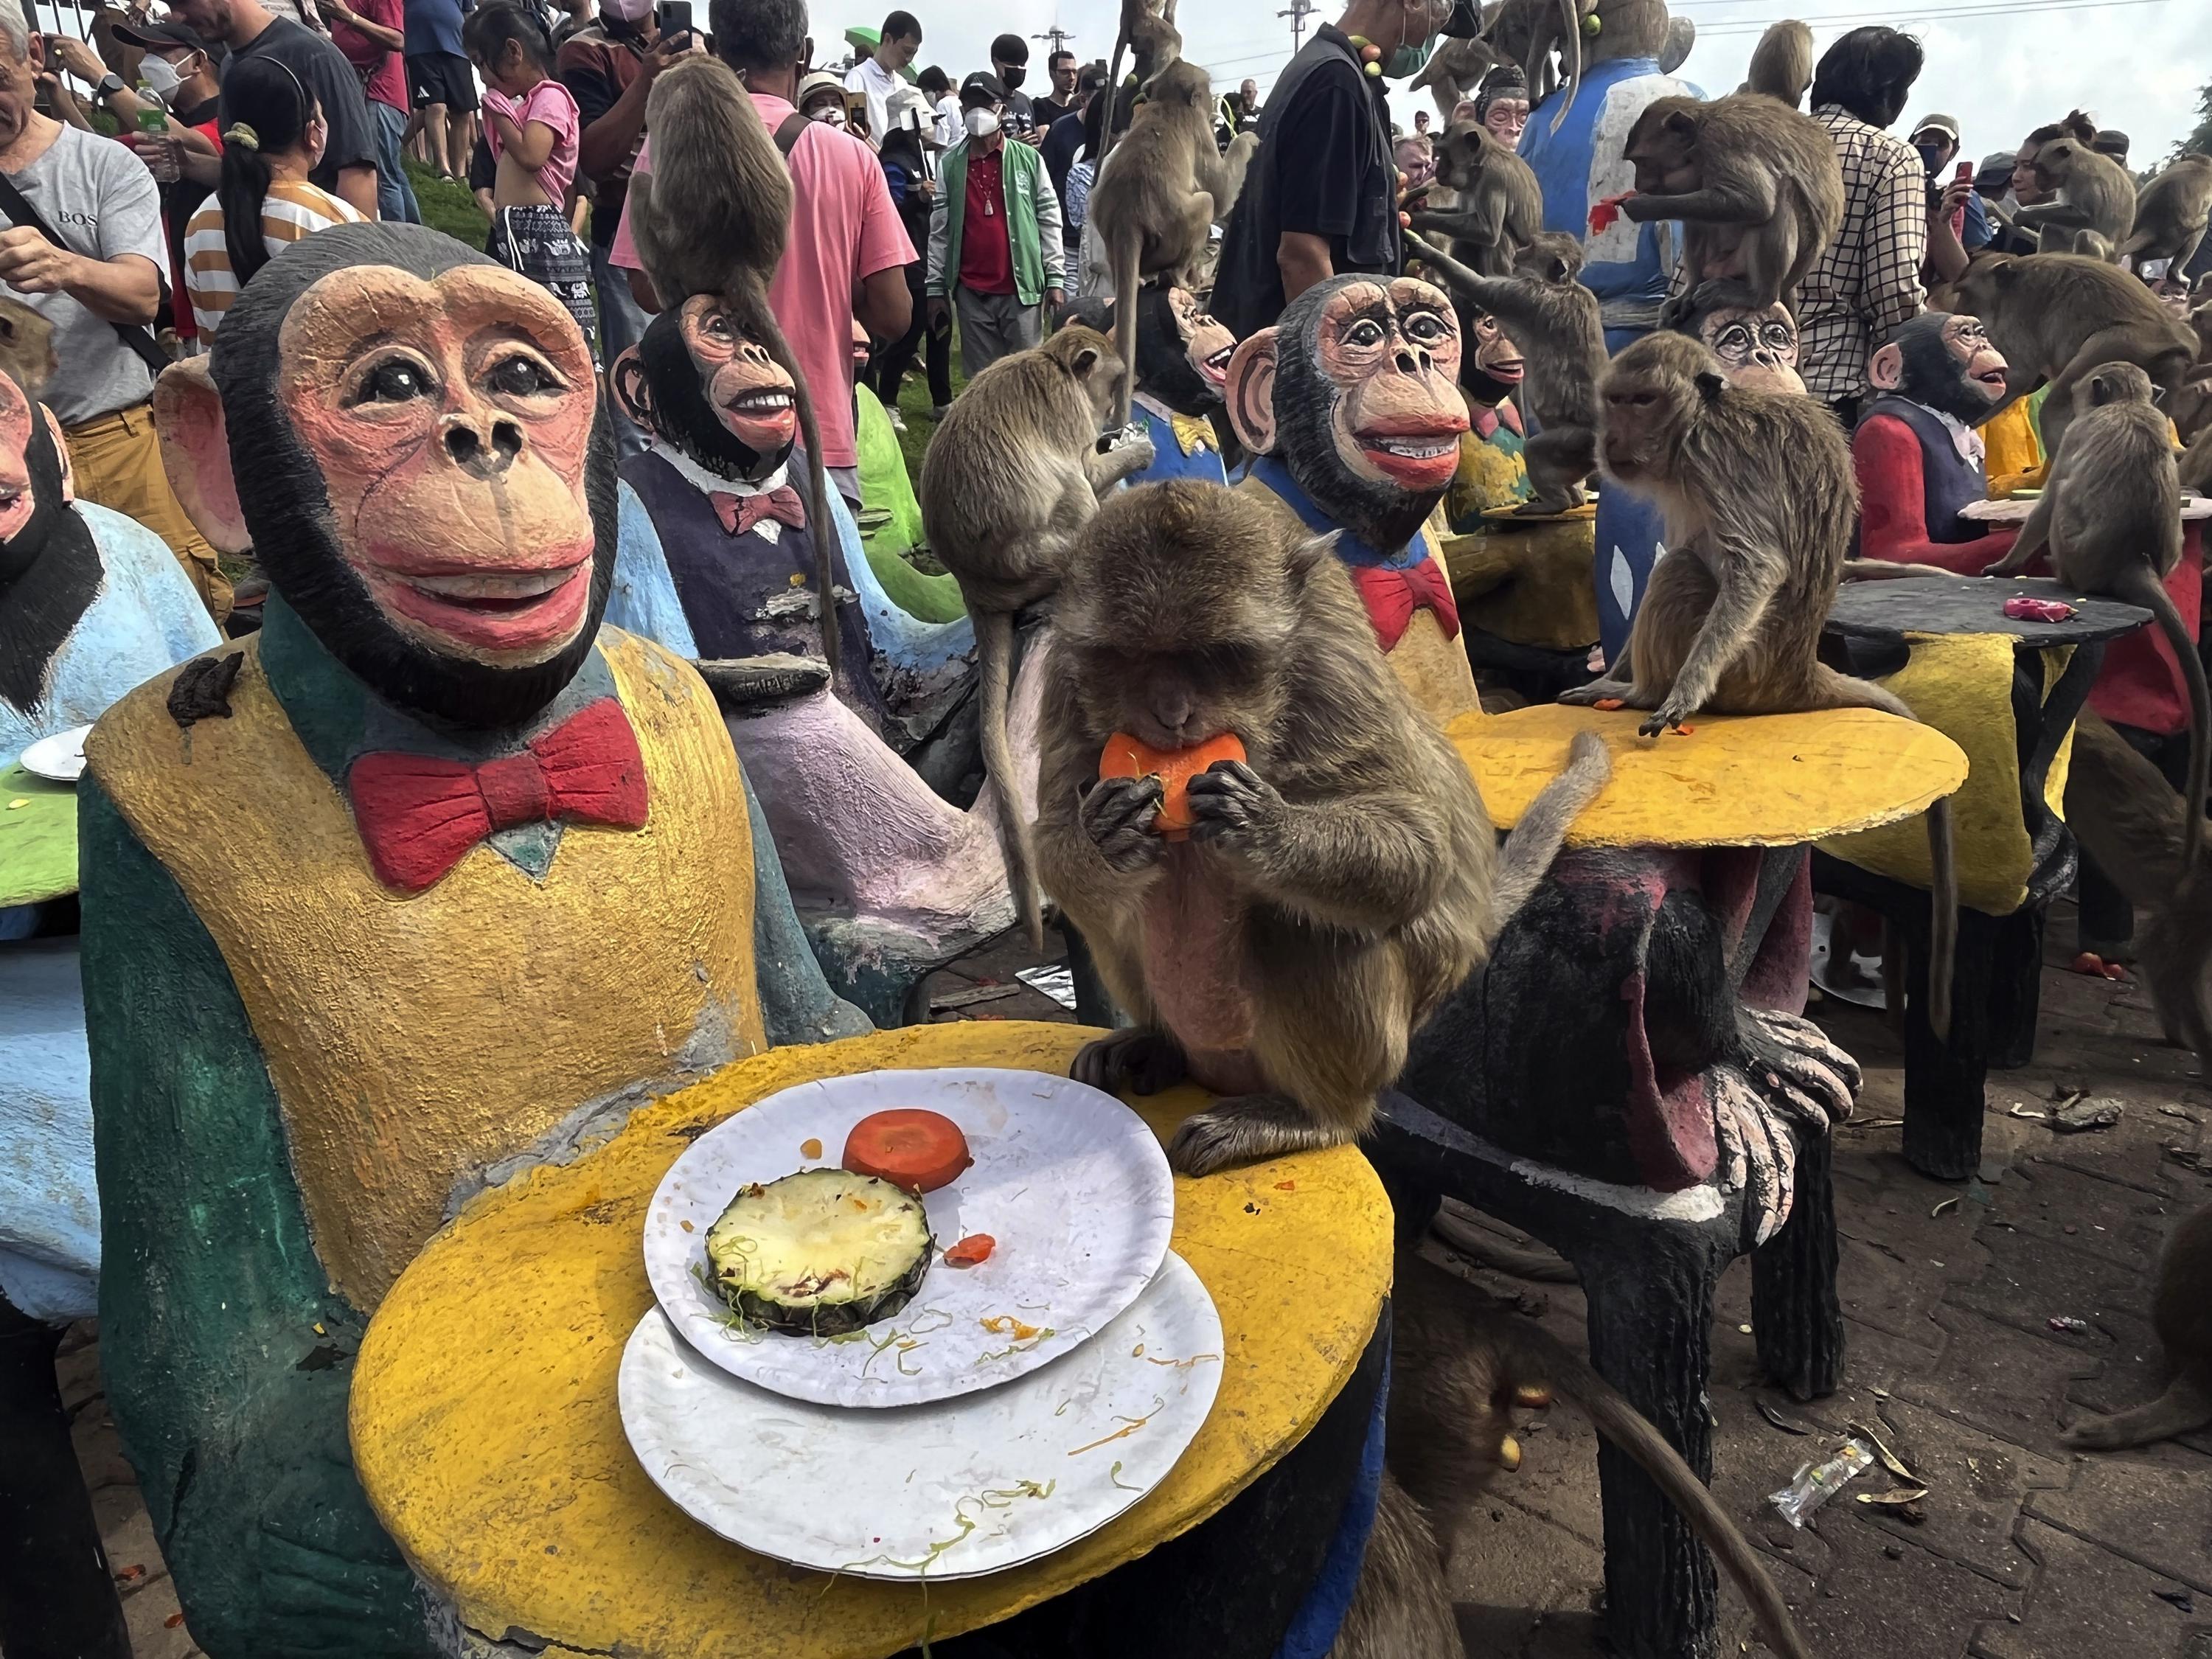 Monkeys in central Thailand city mark their day with feast AP News